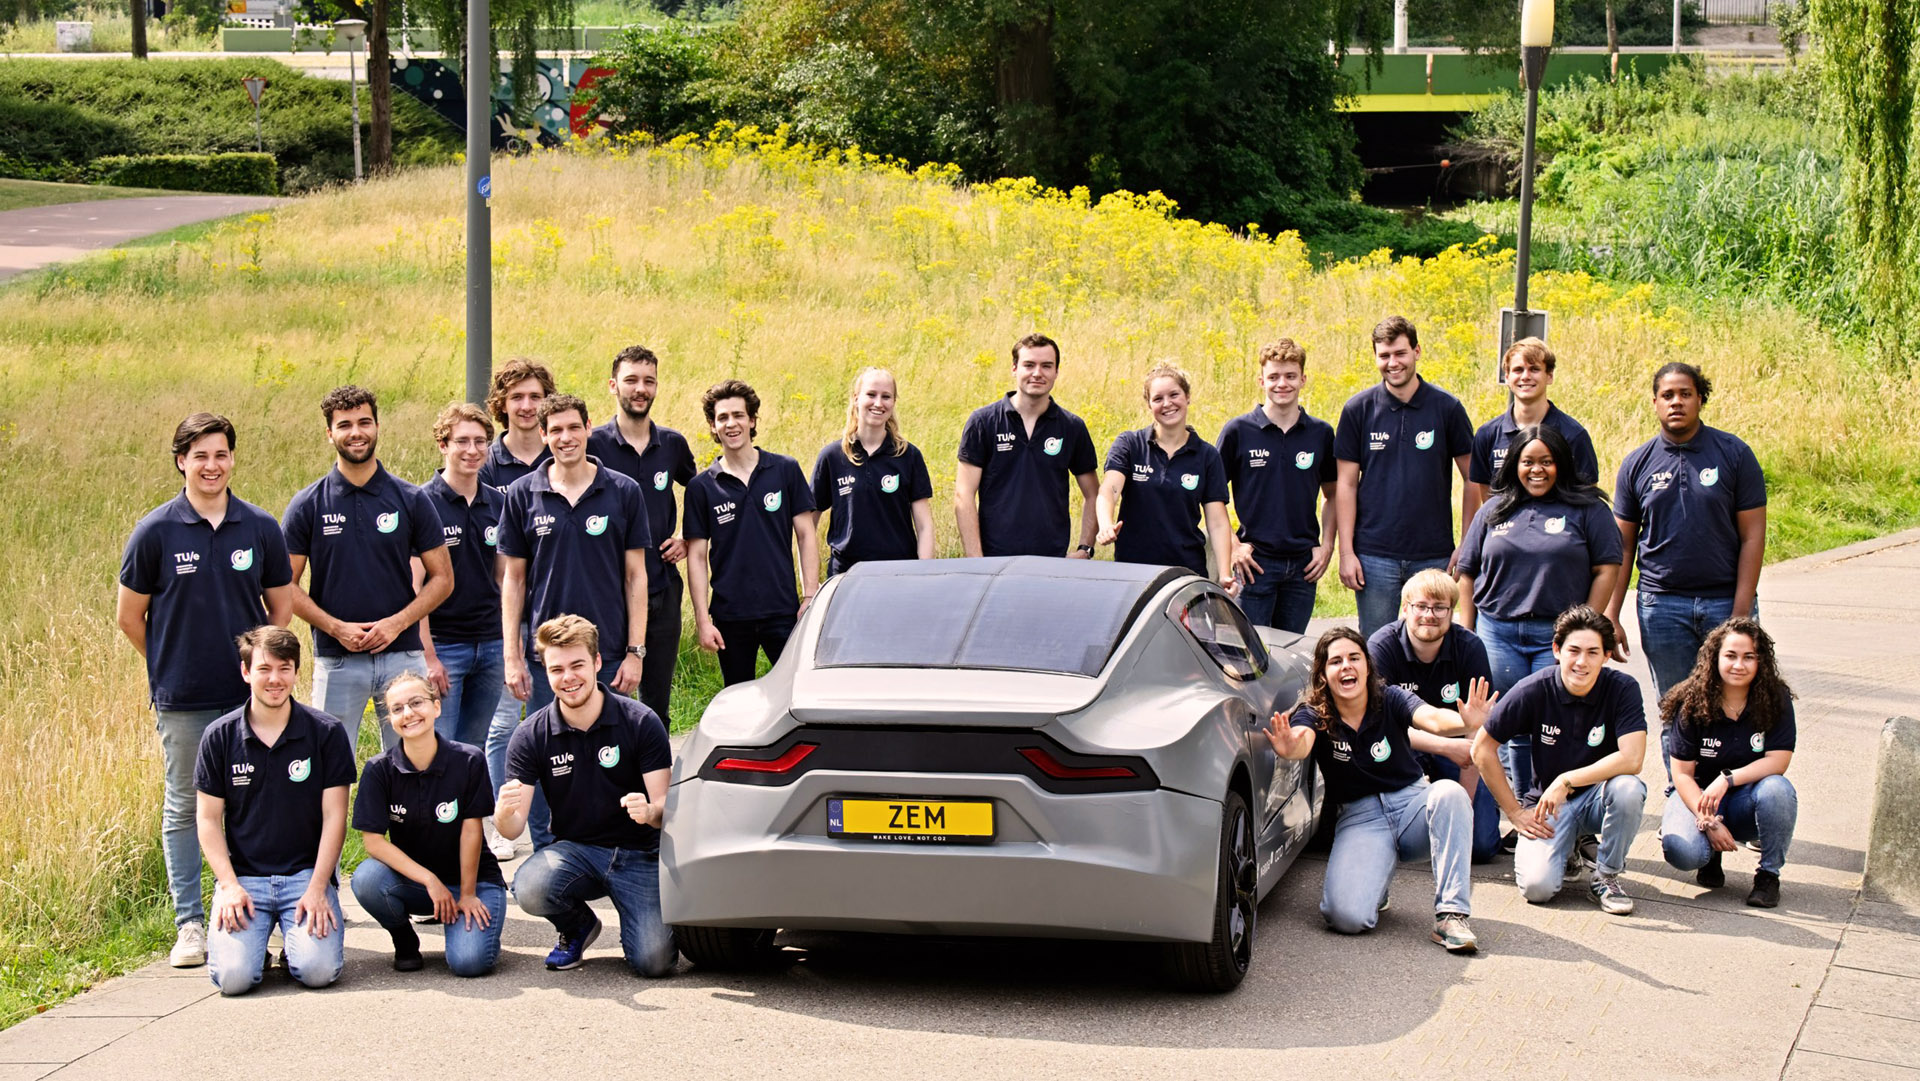 ZEM.  The team, called Solar Team Eindhoven, consists of 35 students, the creators of